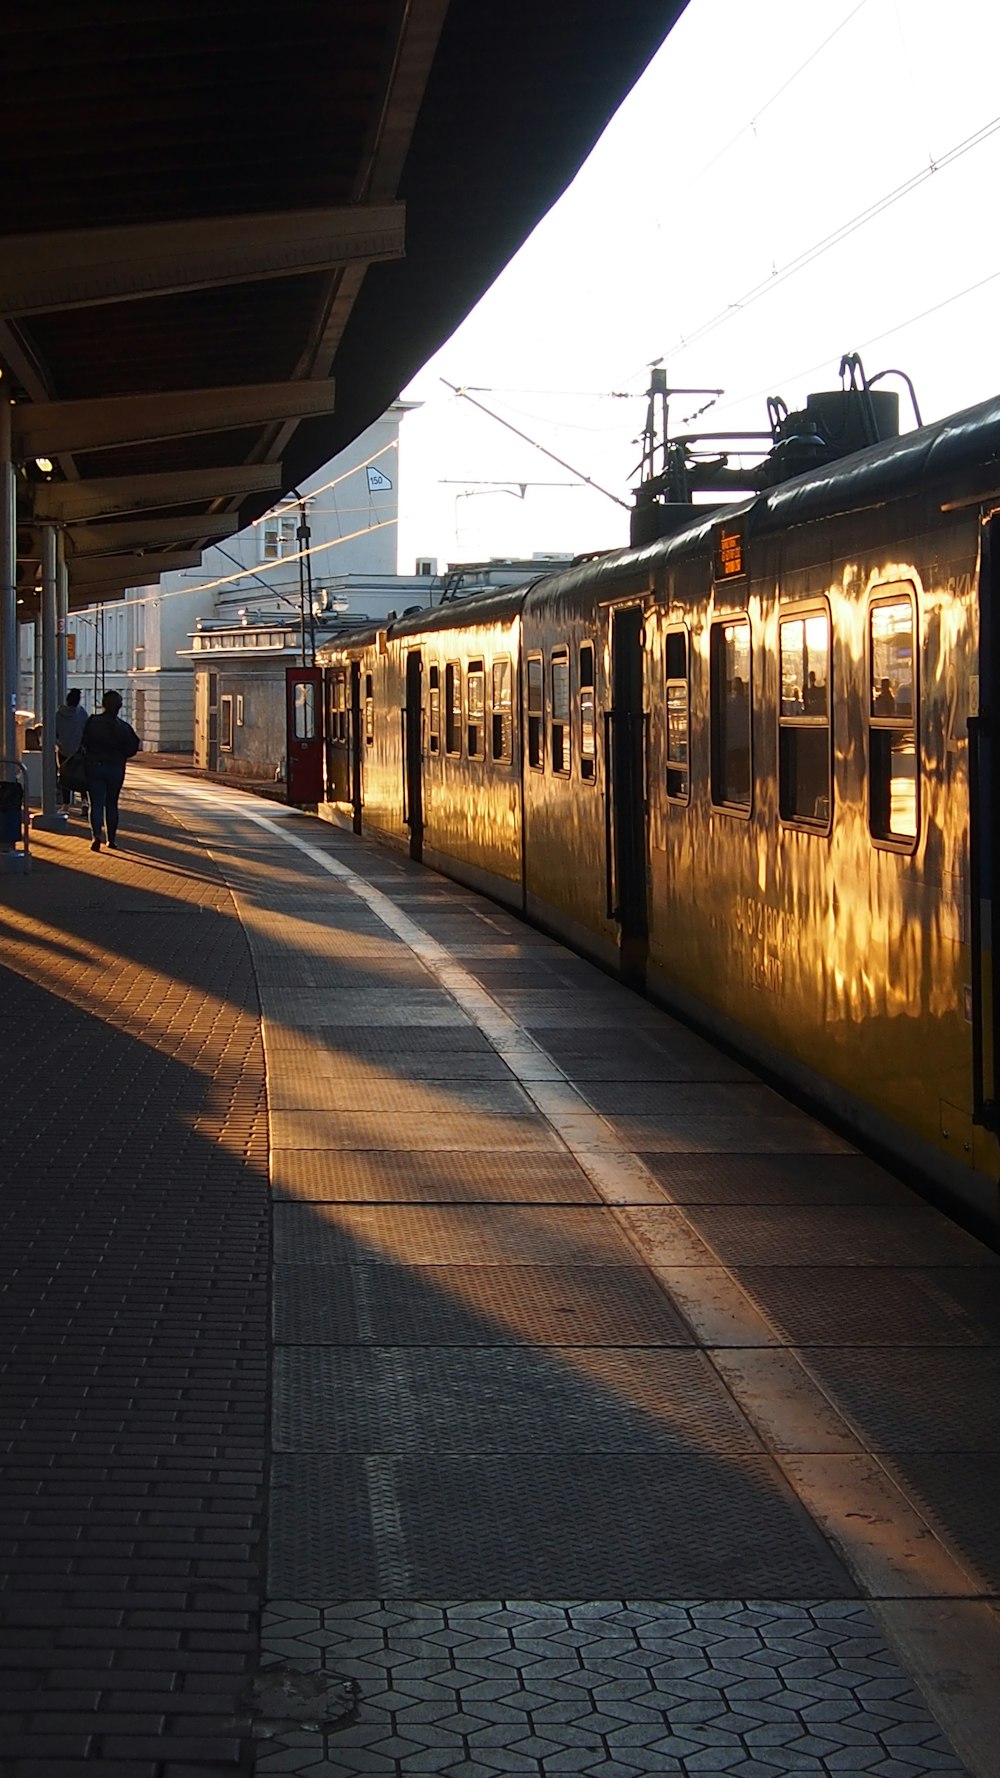 a train parked at a train station next to a platform